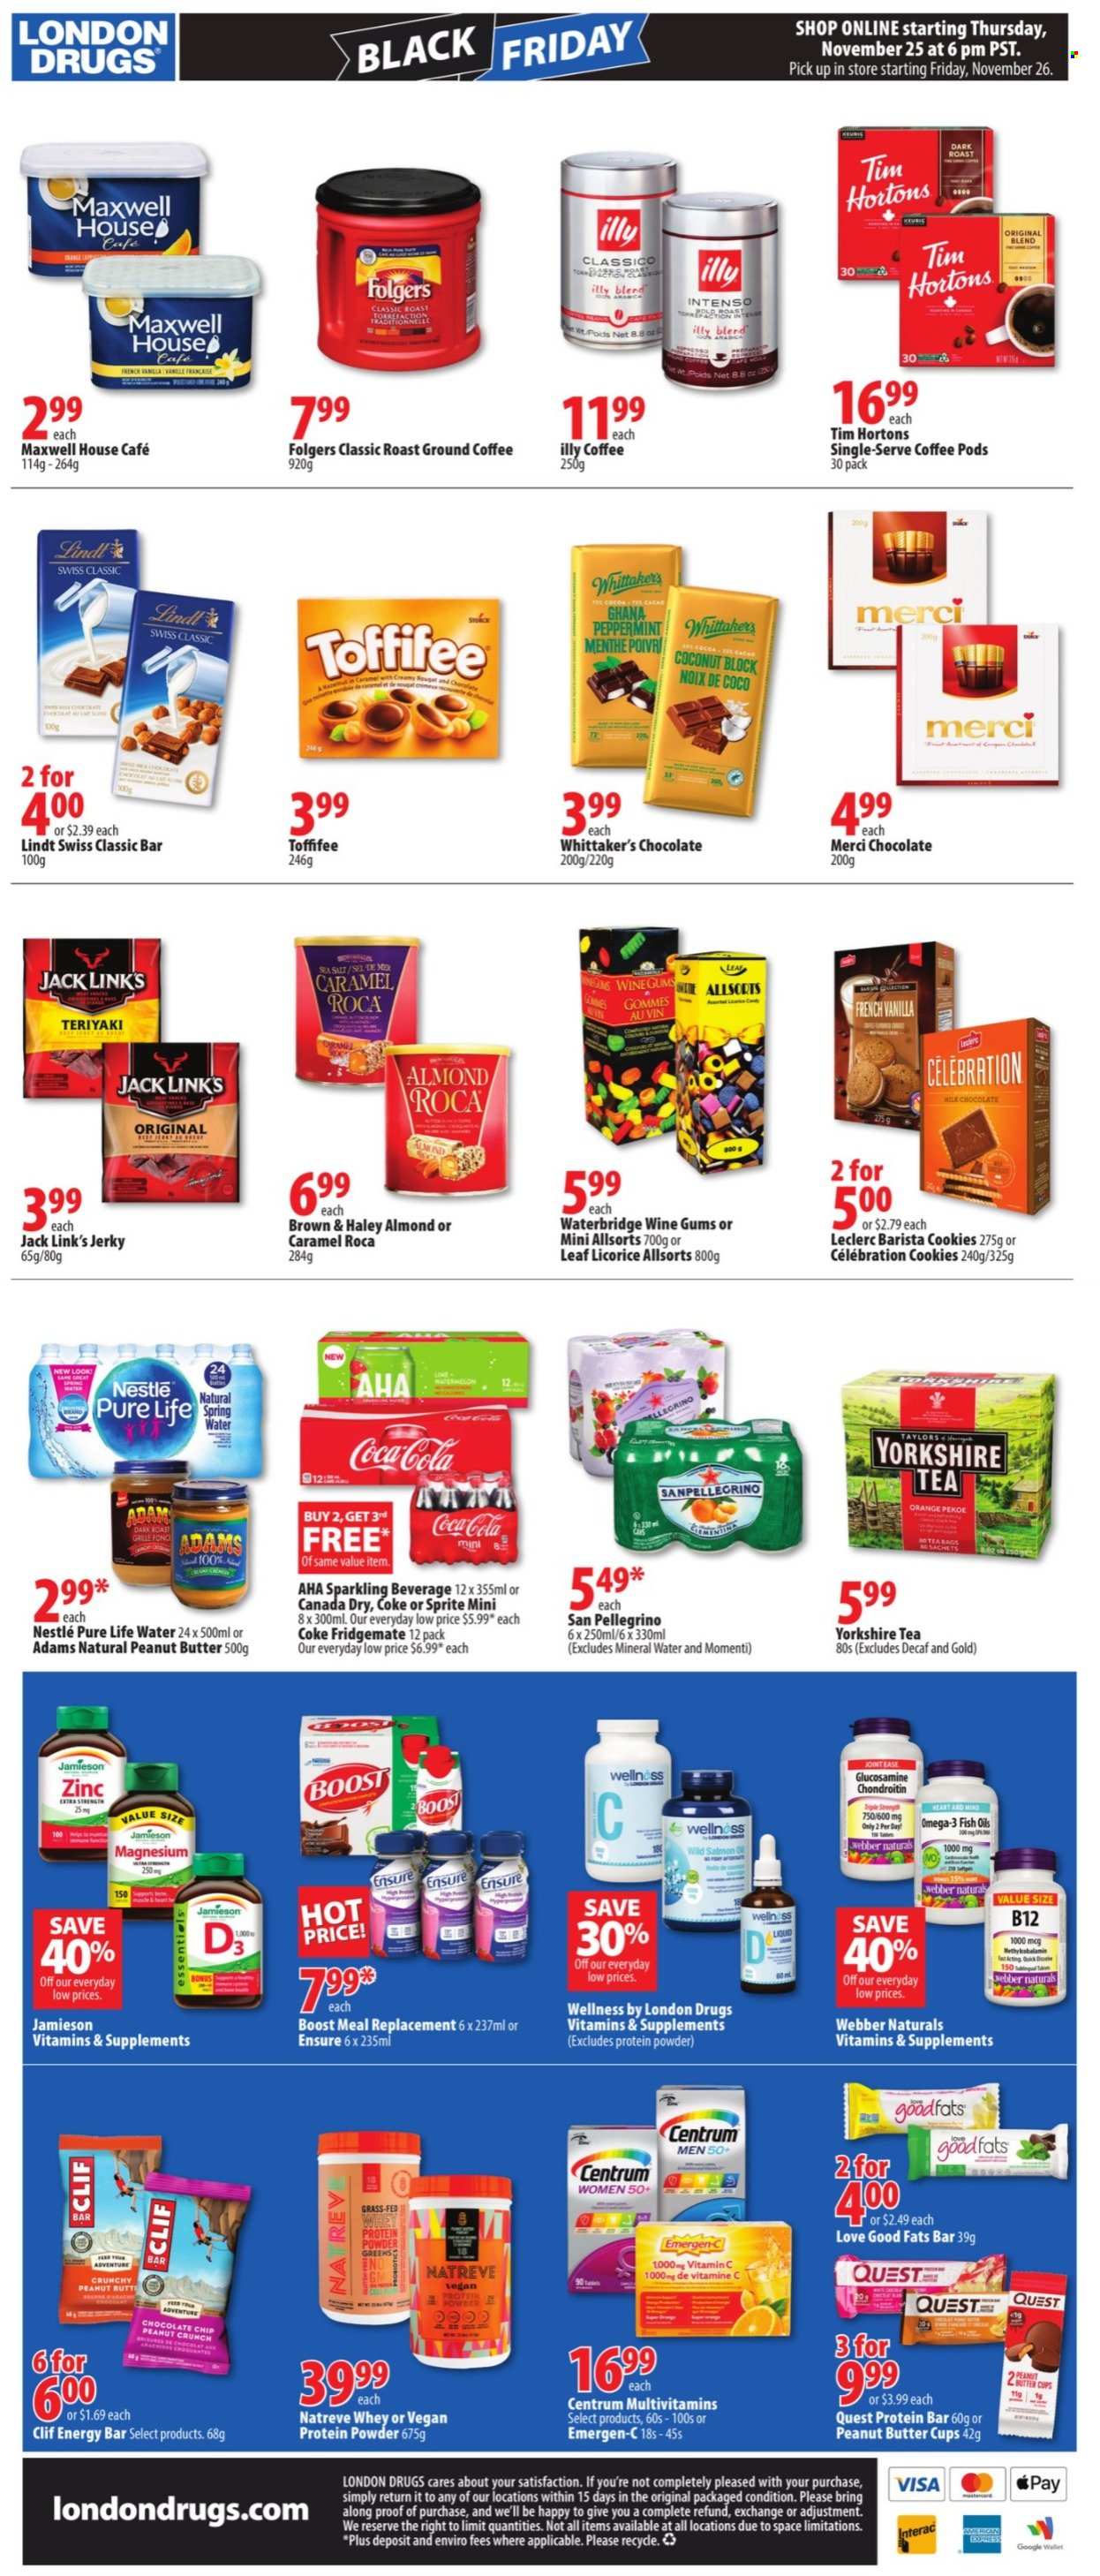 thumbnail - London Drugs Flyer - November 26, 2021 - December 01, 2021 - Sales products - cookies, milk chocolate, Celebration, Merci, Whittaker's, peanut butter cups, Jack Link's, sea salt, protein bar, Classico, Canada Dry, Coca-Cola, Sprite, mineral water, Pure Life Water, San Pellegrino, Boost, Maxwell House, tea, tea bags, coffee pods, Folgers, ground coffee, Intenso, Illy, glucosamine, magnesium, multivitamin, vitamin c, Omega-3, Emergen-C, zinc, whey protein, Centrum, Nestlé, Lindt. Page 18.